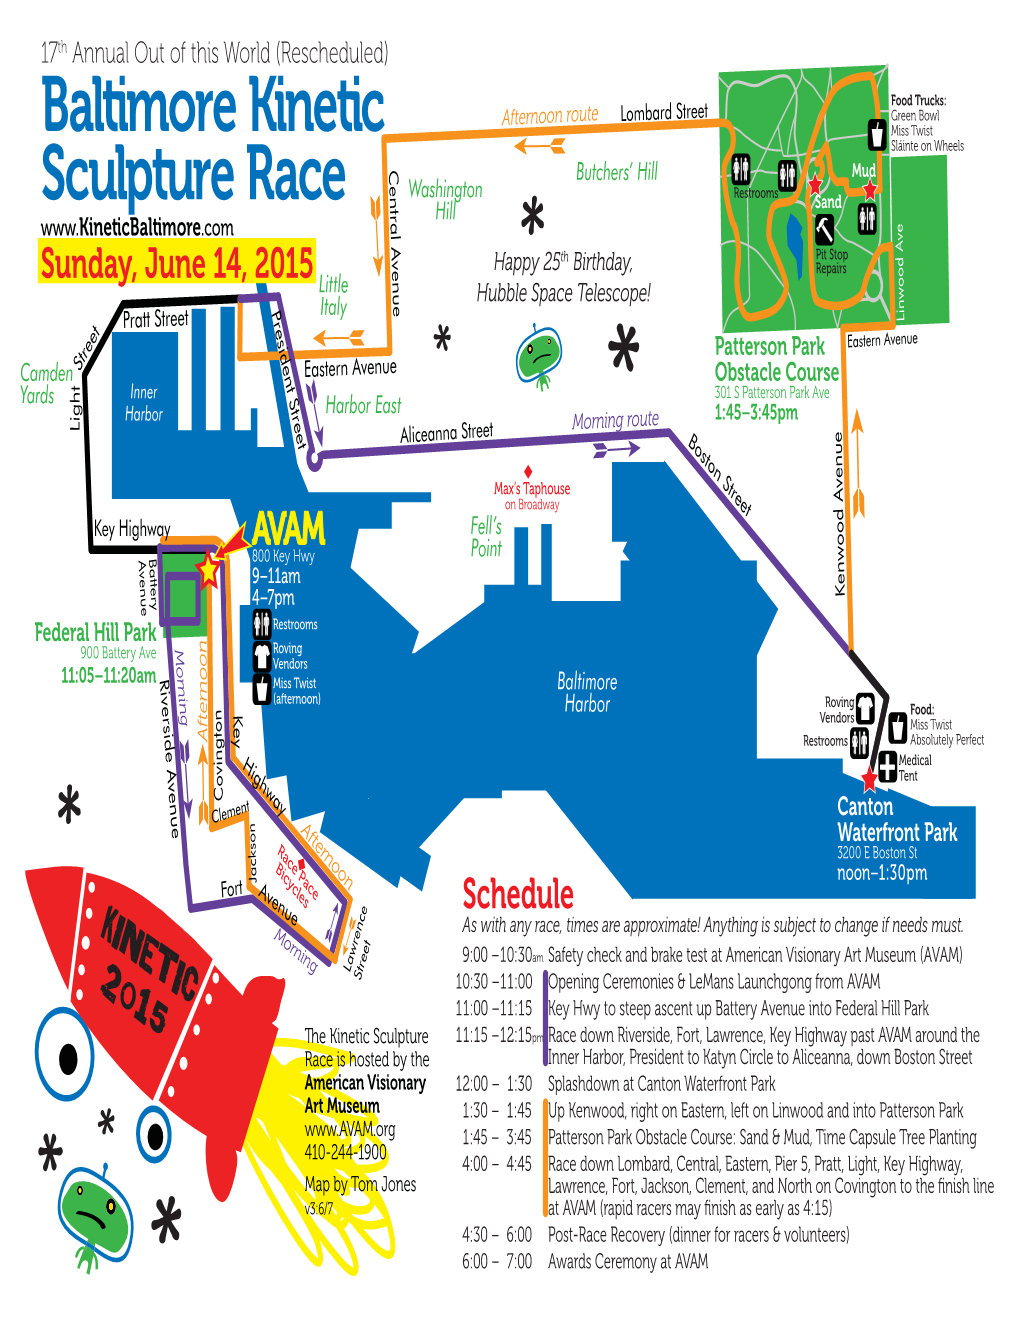 2015 Baltimore Kinetic Sculpture Race Spectator's Guide